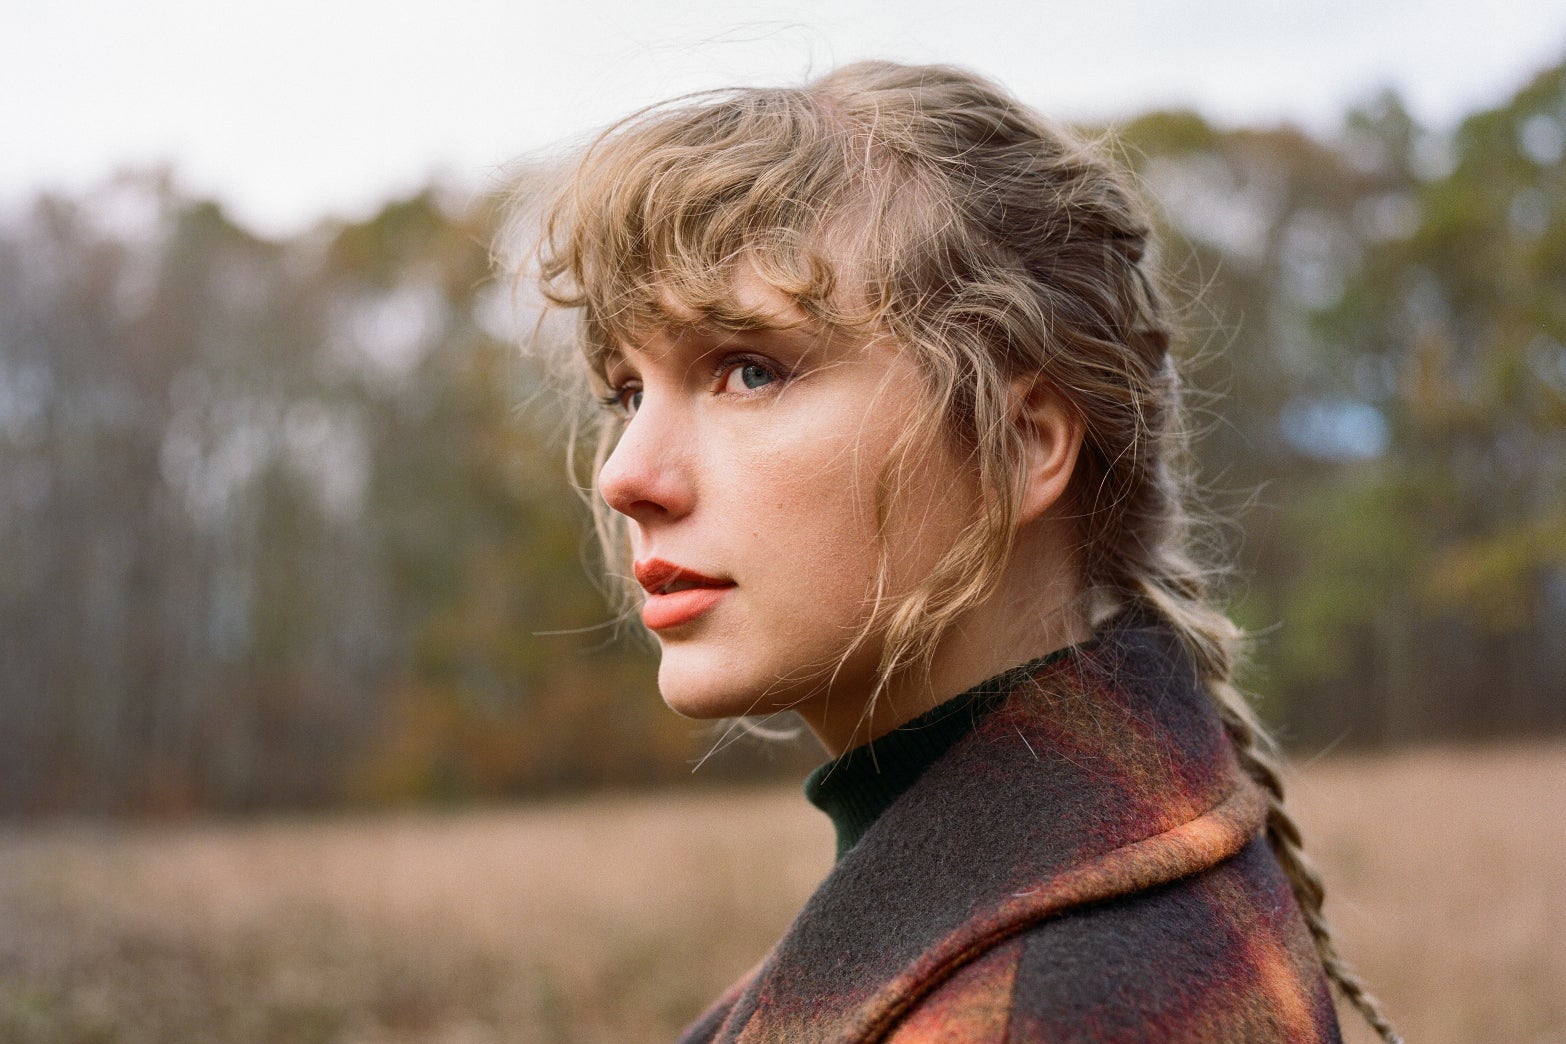 Taylor Swift, in a wintry field, in a braid and a plaid coat.